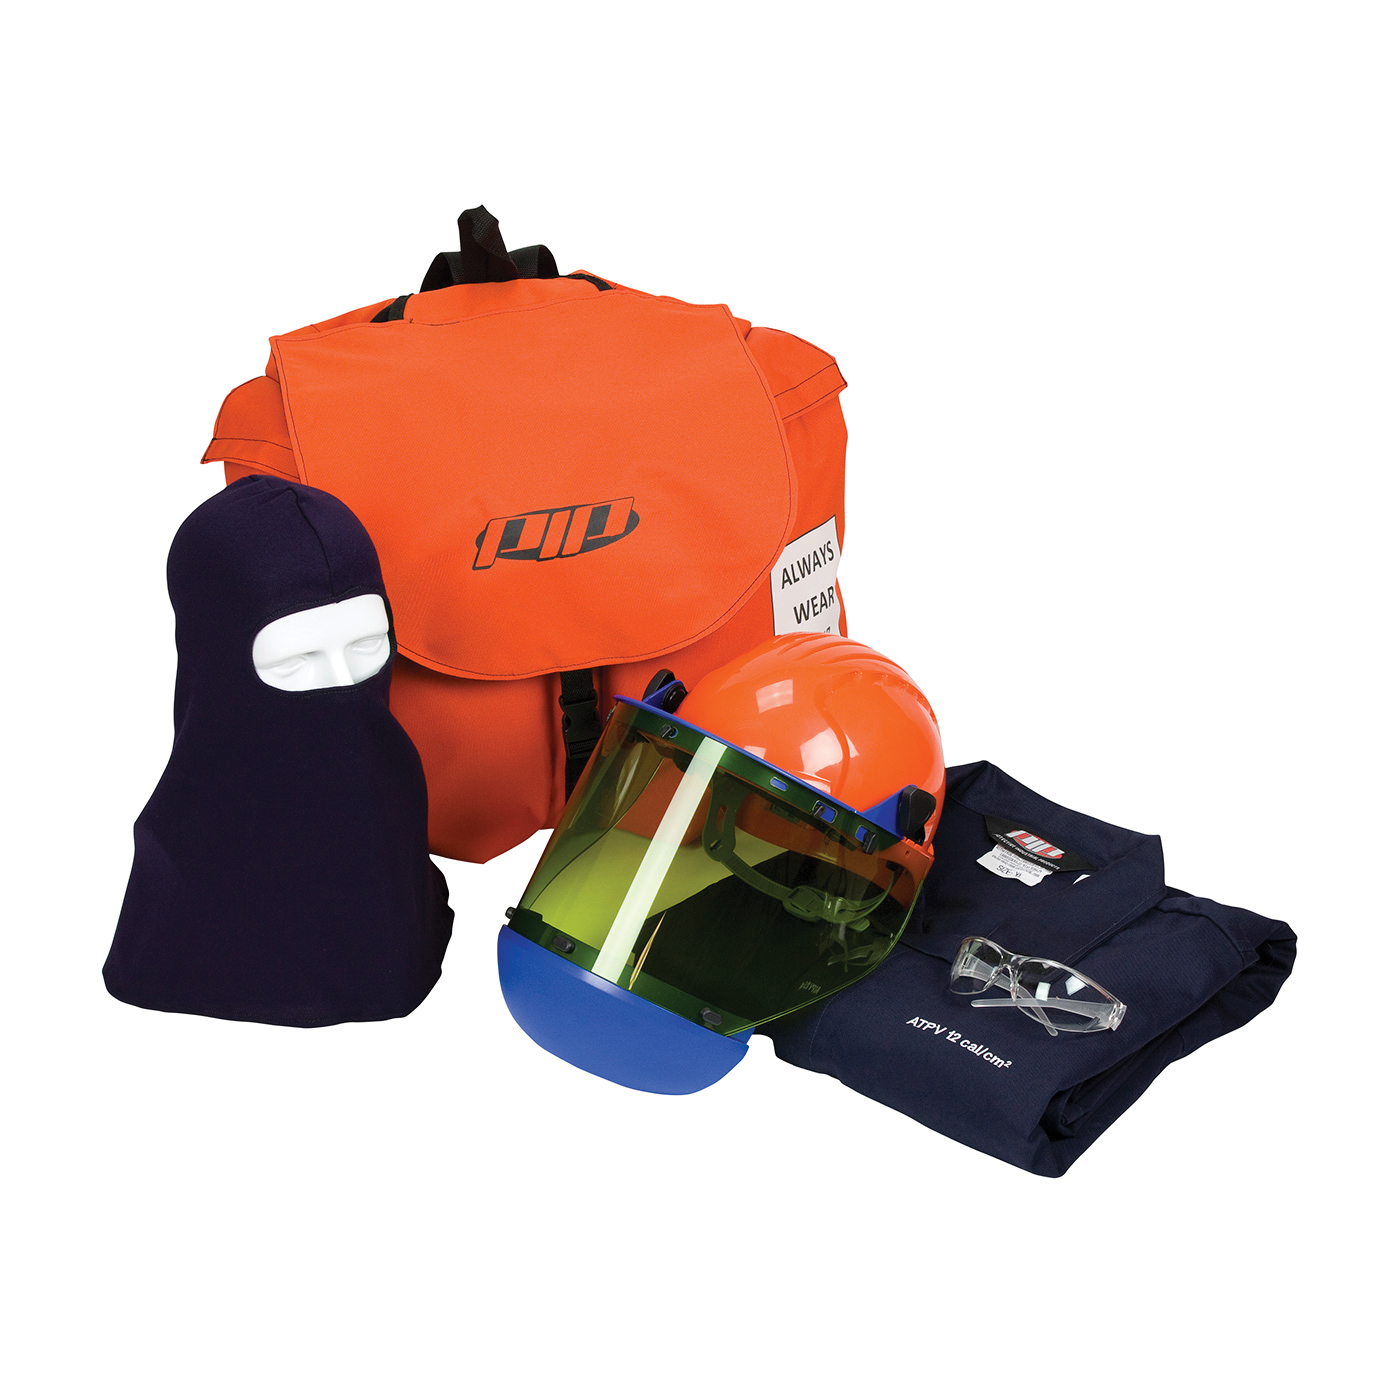 PIP® 9150-5488EB/4X Arc Flash Kit, Hazard Risk Category (HRC): 2, Hood/Face Shield Max Arc Flash Protection: 12 cal/sq-cm, Garment Max Arc Flash Protection: 12 cal/sq-cm, Specifications Met: NFPA 70E-2018, Arc Shield/Hard Hat Head/Face Protection